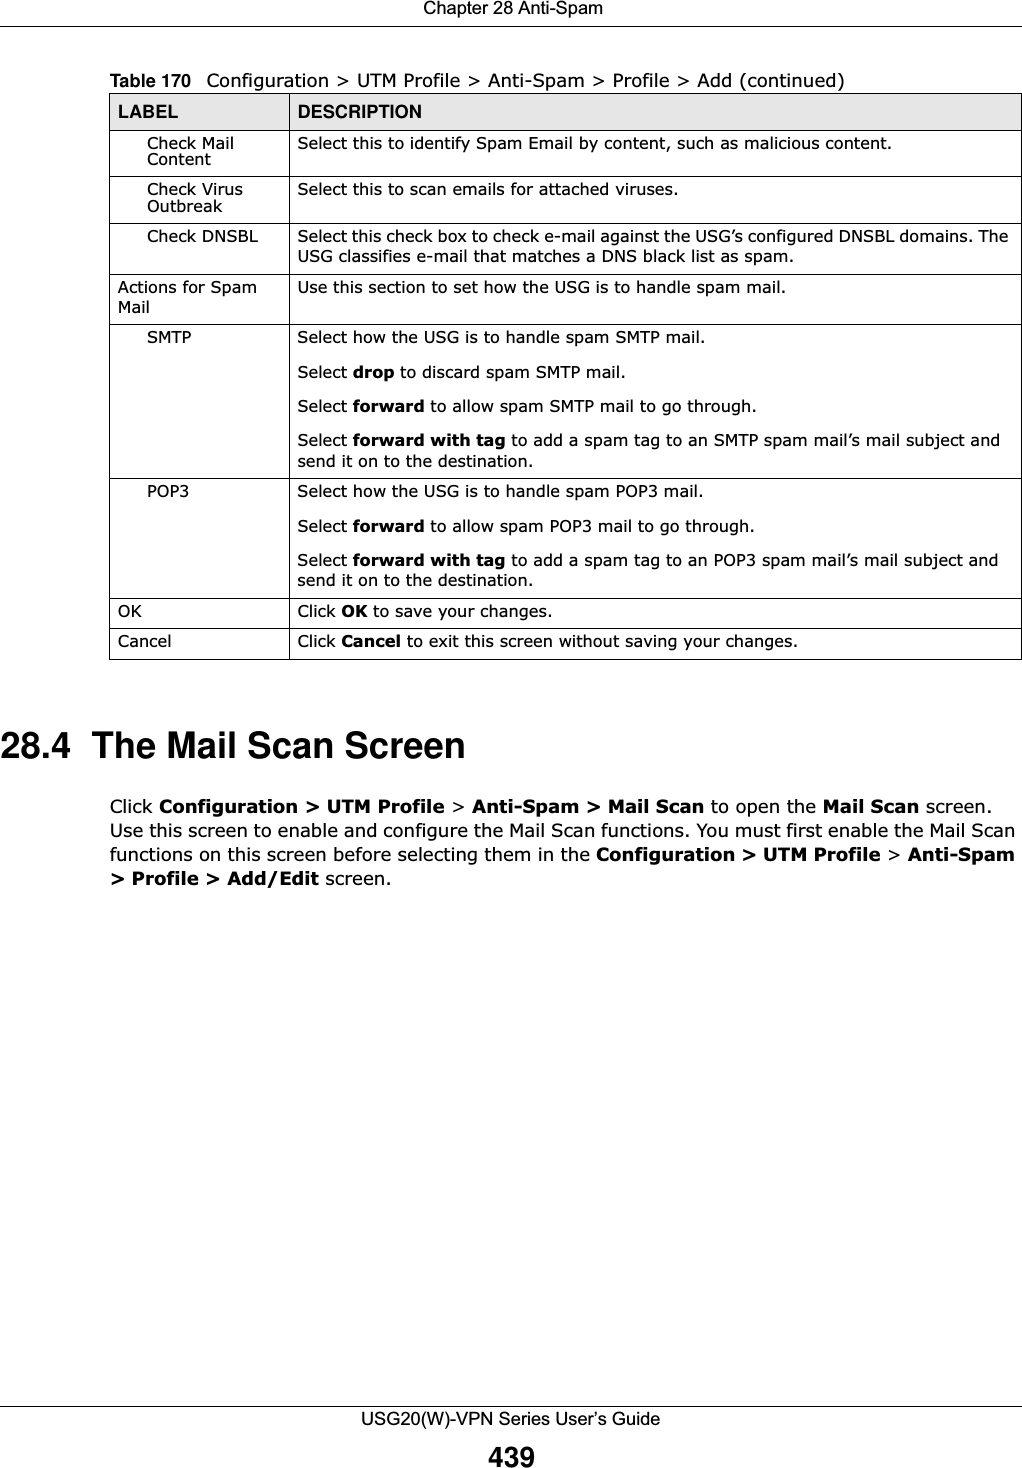  Chapter 28 Anti-SpamUSG20(W)-VPN Series User’s Guide43928.4  The Mail Scan ScreenClick Configuration &gt; UTM Profile &gt; Anti-Spam &gt; Mail Scan to open the Mail Scan screen. Use this screen to enable and configure the Mail Scan functions. You must first enable the Mail Scan functions on this screen before selecting them in the Configuration &gt; UTM Profile &gt; Anti-Spam &gt; Profile &gt; Add/Edit screen. Check Mail Content Select this to identify Spam Email by content, such as malicious content. Check Virus Outbreak Select this to scan emails for attached viruses.Check DNSBL Select this check box to check e-mail against the USG’s configured DNSBL domains. The USG classifies e-mail that matches a DNS black list as spam.Actions for Spam MailUse this section to set how the USG is to handle spam mail.SMTP Select how the USG is to handle spam SMTP mail.Select drop to discard spam SMTP mail.Select forward to allow spam SMTP mail to go through.Select forward with tag to add a spam tag to an SMTP spam mail’s mail subject and send it on to the destination. POP3 Select how the USG is to handle spam POP3 mail.Select forward to allow spam POP3 mail to go through.Select forward with tag to add a spam tag to an POP3 spam mail’s mail subject and send it on to the destination. OK Click OK to save your changes. Cancel Click Cancel to exit this screen without saving your changes.Table 170   Configuration &gt; UTM Profile &gt; Anti-Spam &gt; Profile &gt; Add (continued)LABEL DESCRIPTION